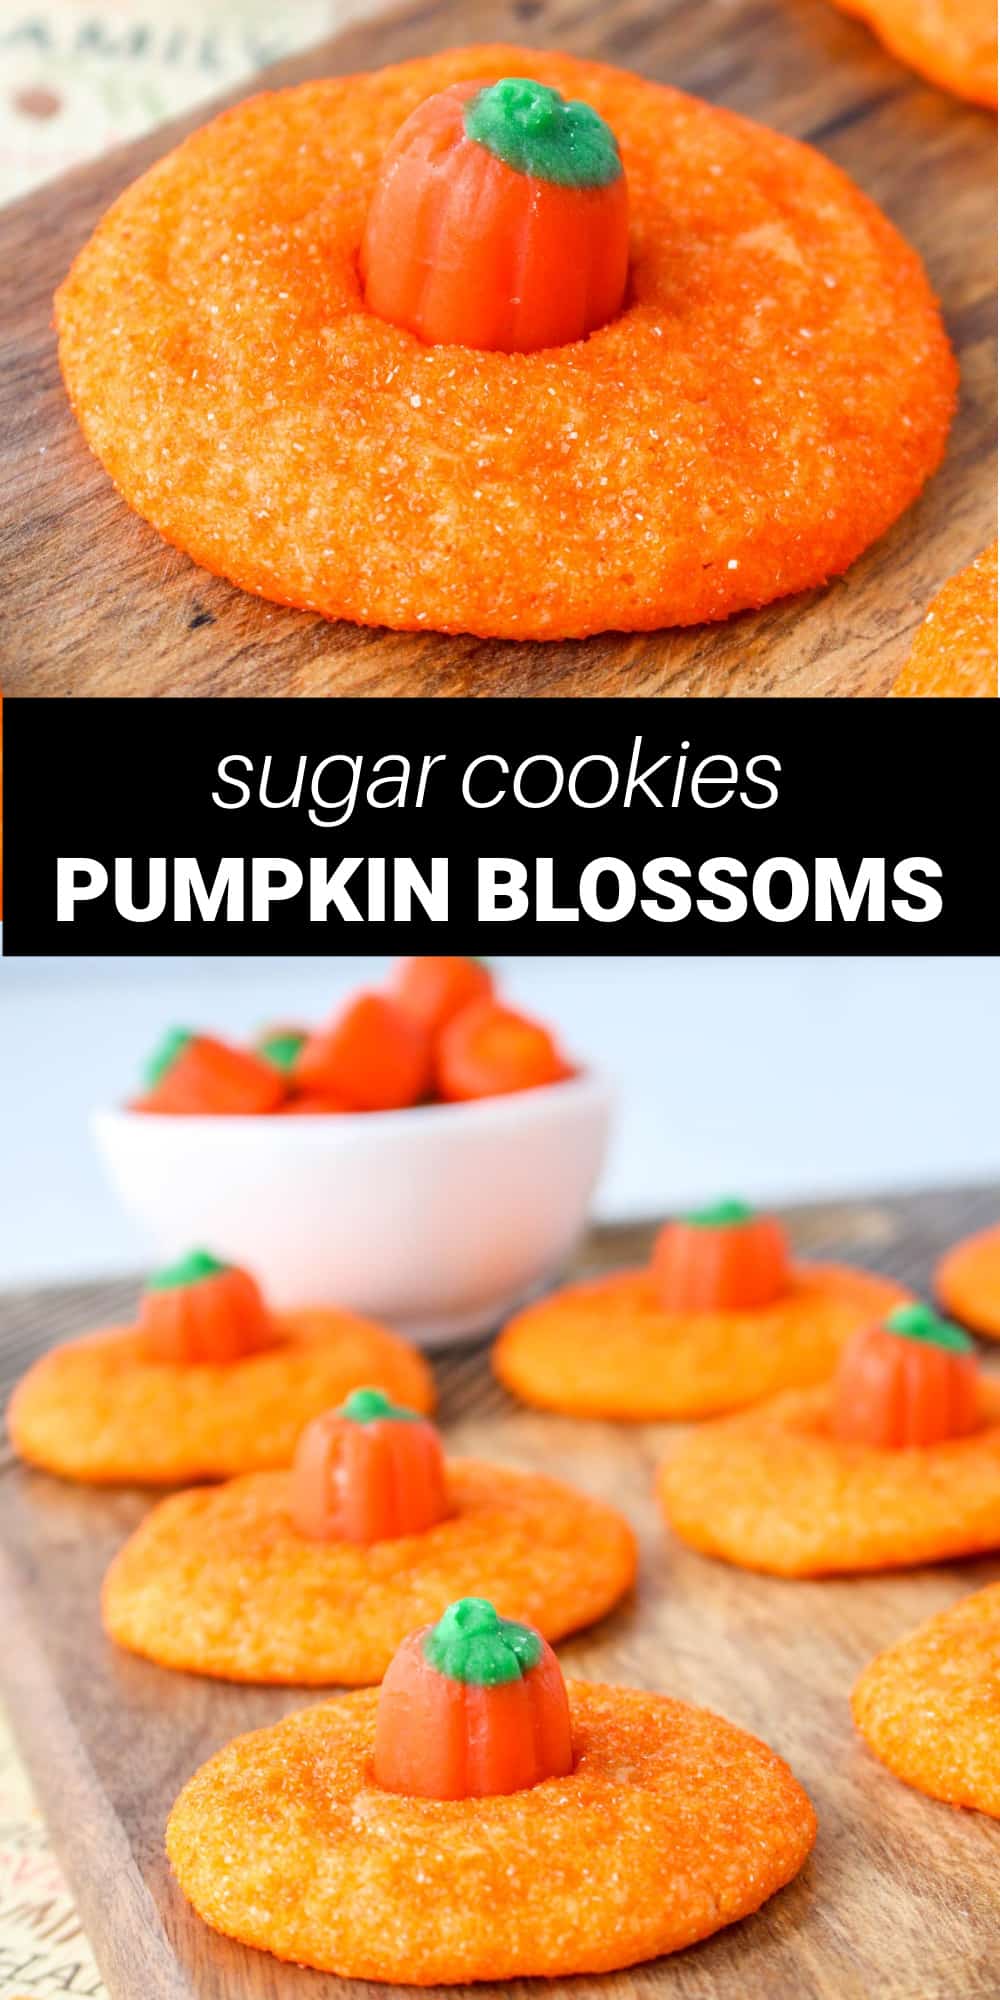 These pumpkin blossom cookies are a simple and fun way to dress up a traditional sugar cookie for Halloween. They have the same soft and chewy texture and sweet vanilla flavor that everyone loves in a sugar cookie, plus a fun orange color and a cute candy pumpkin on top.